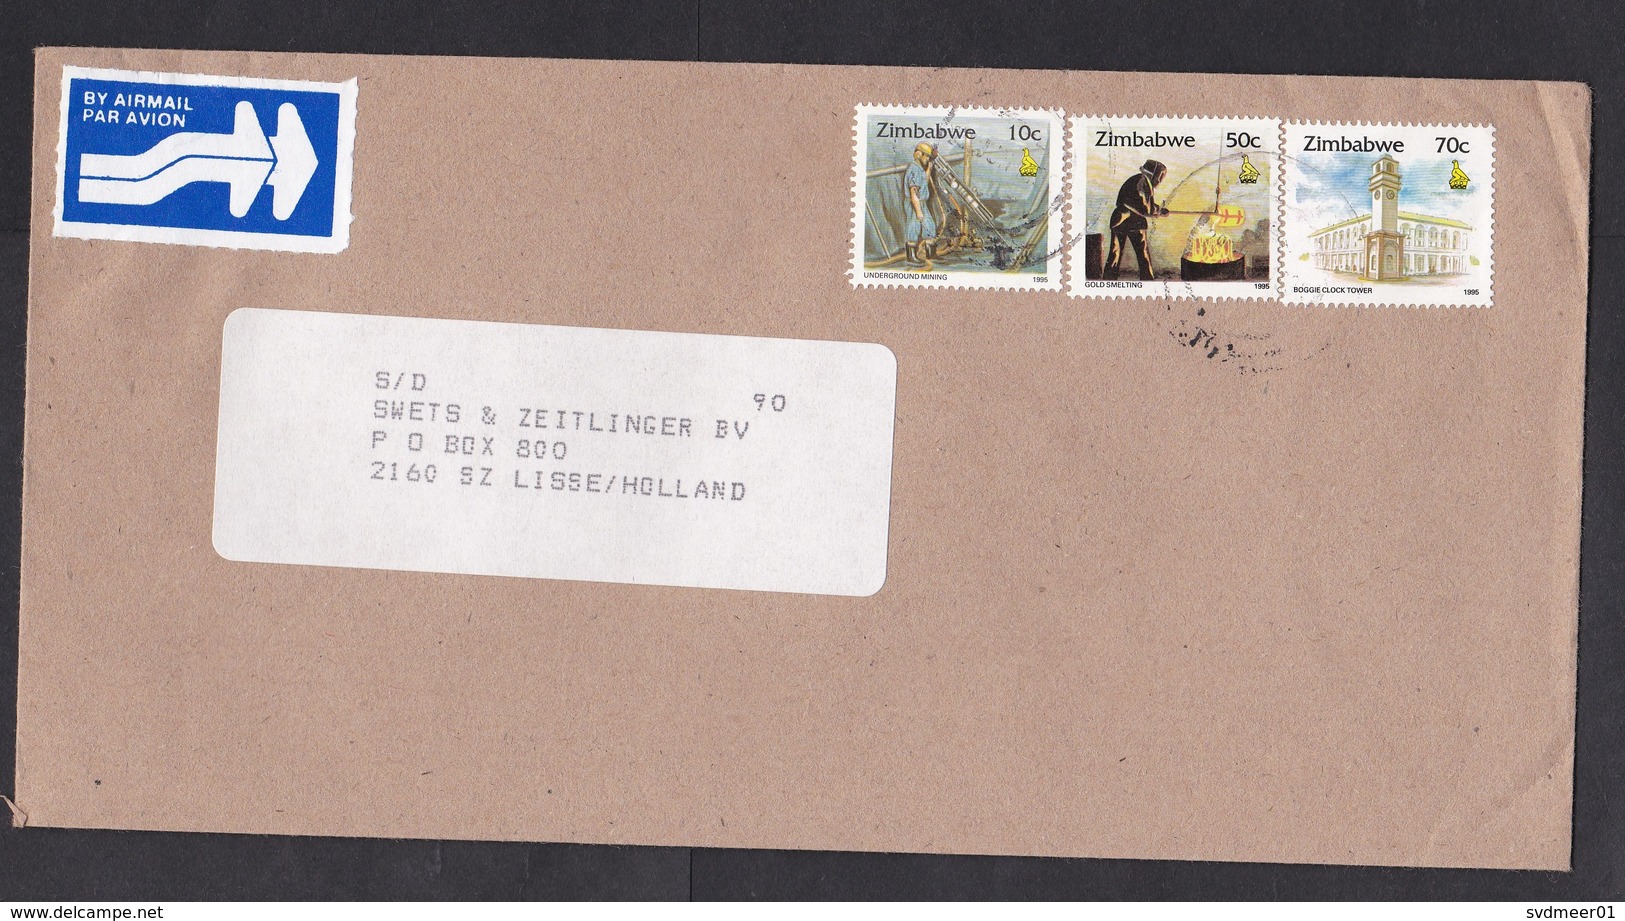 Zimbabwe: Airmail Cover To Netherlands, 1997, 3 Stamps, Mining, Drill, Gold Mine Industry, Clock Tower (traces Of Use) - Zimbabwe (1980-...)